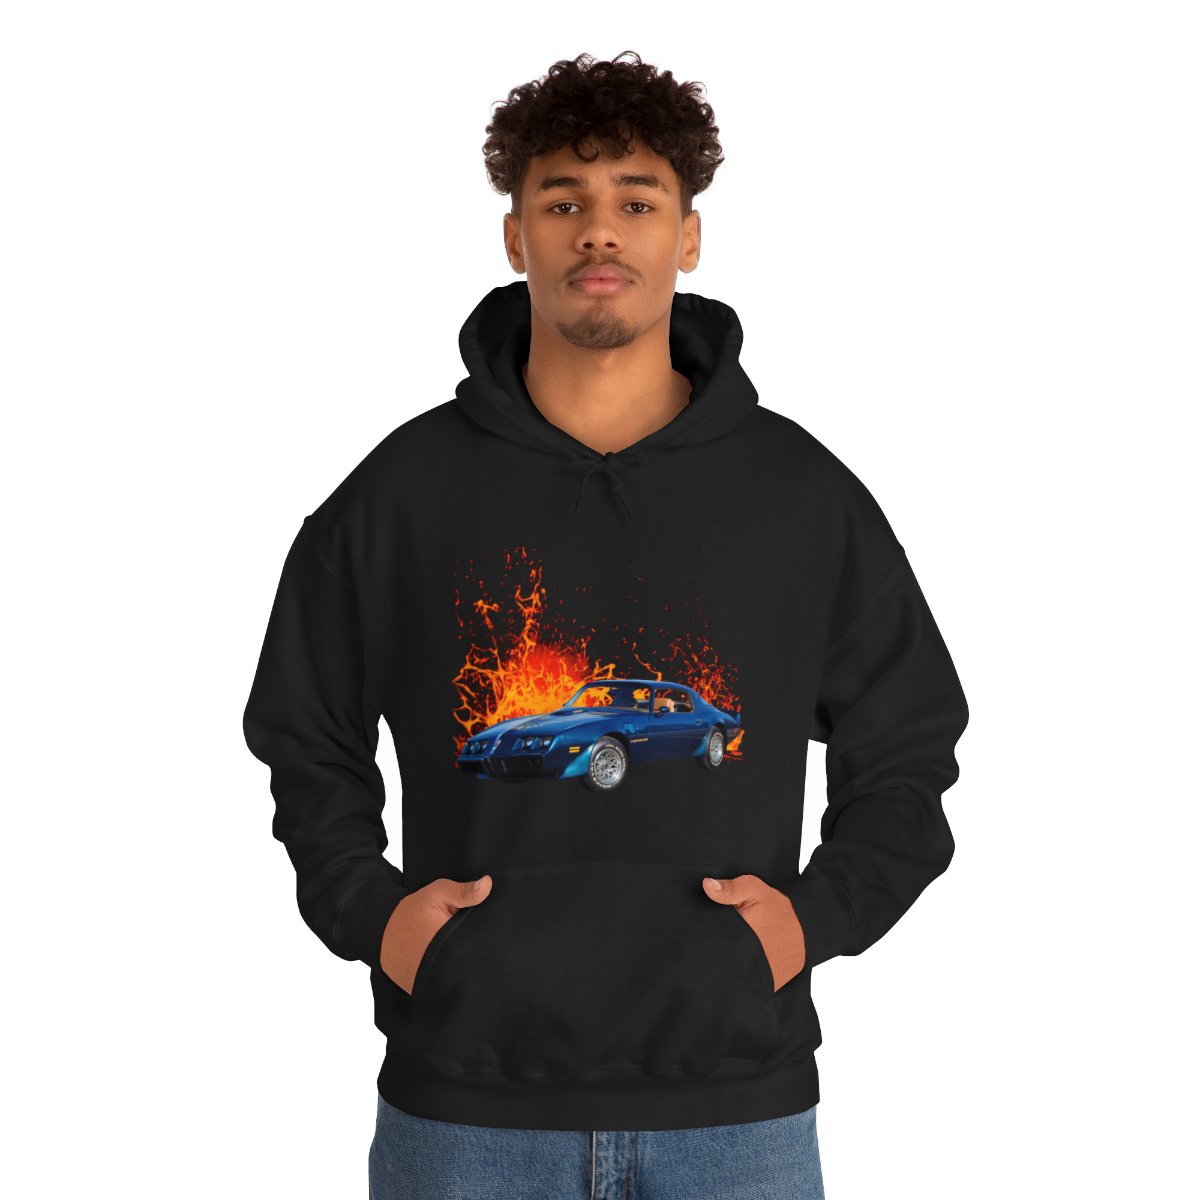 New 1979 Pontiac Firebird Trans AM in our lava series Hoodie Free Shipping!